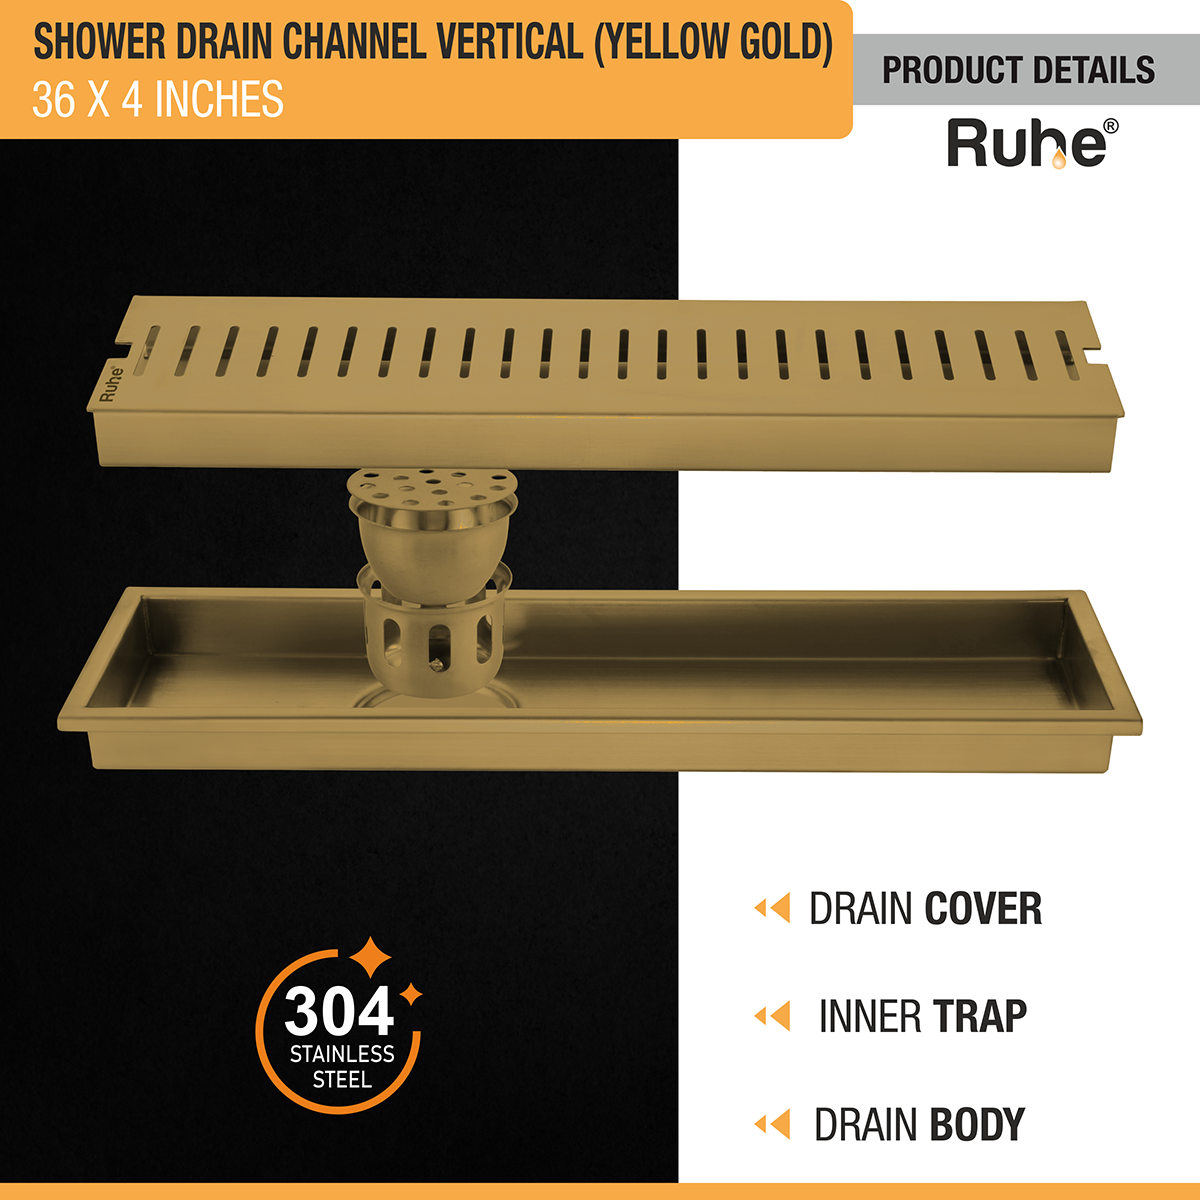 Vertical Shower Drain Channel (36 x 4 Inches) YELLOW GOLD product details